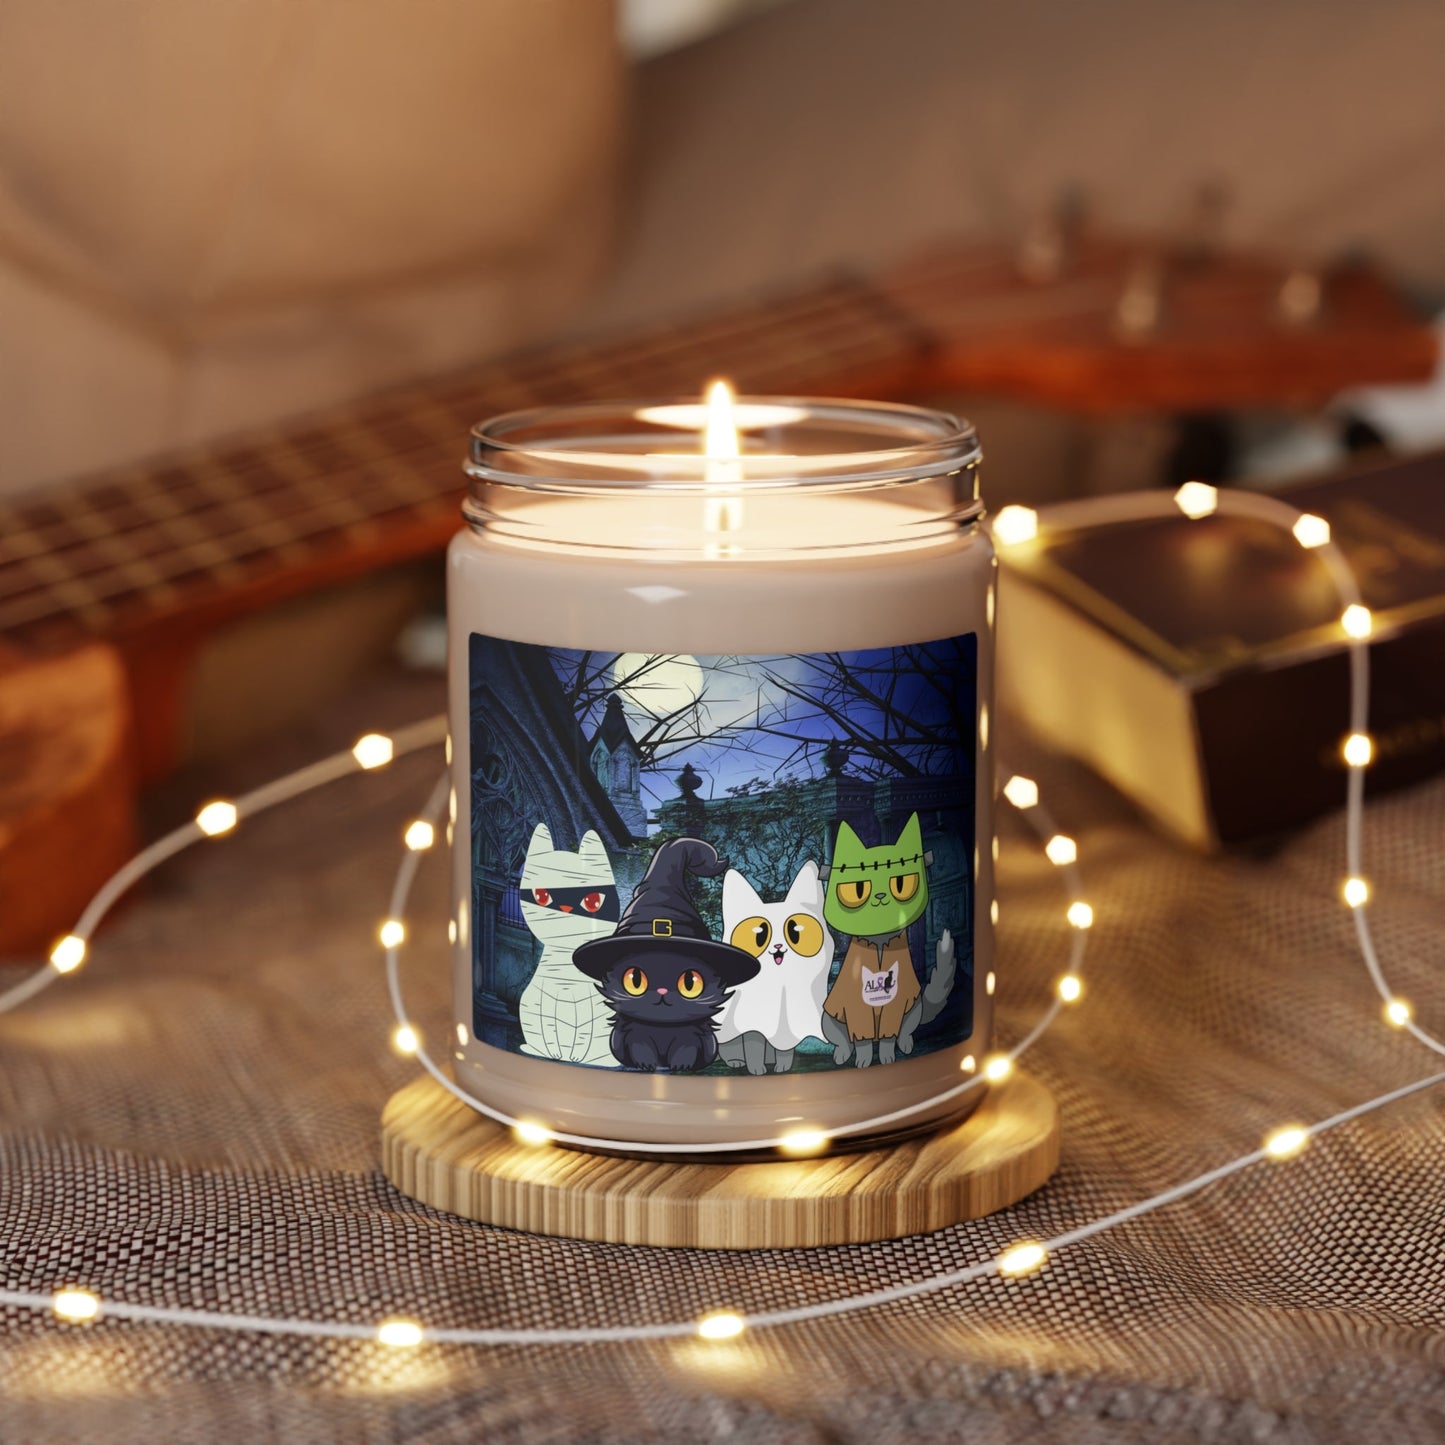 Kostumed Kitties Scented Soy Candle, 9oz - Home Decor - Epileptic Al’s Shop